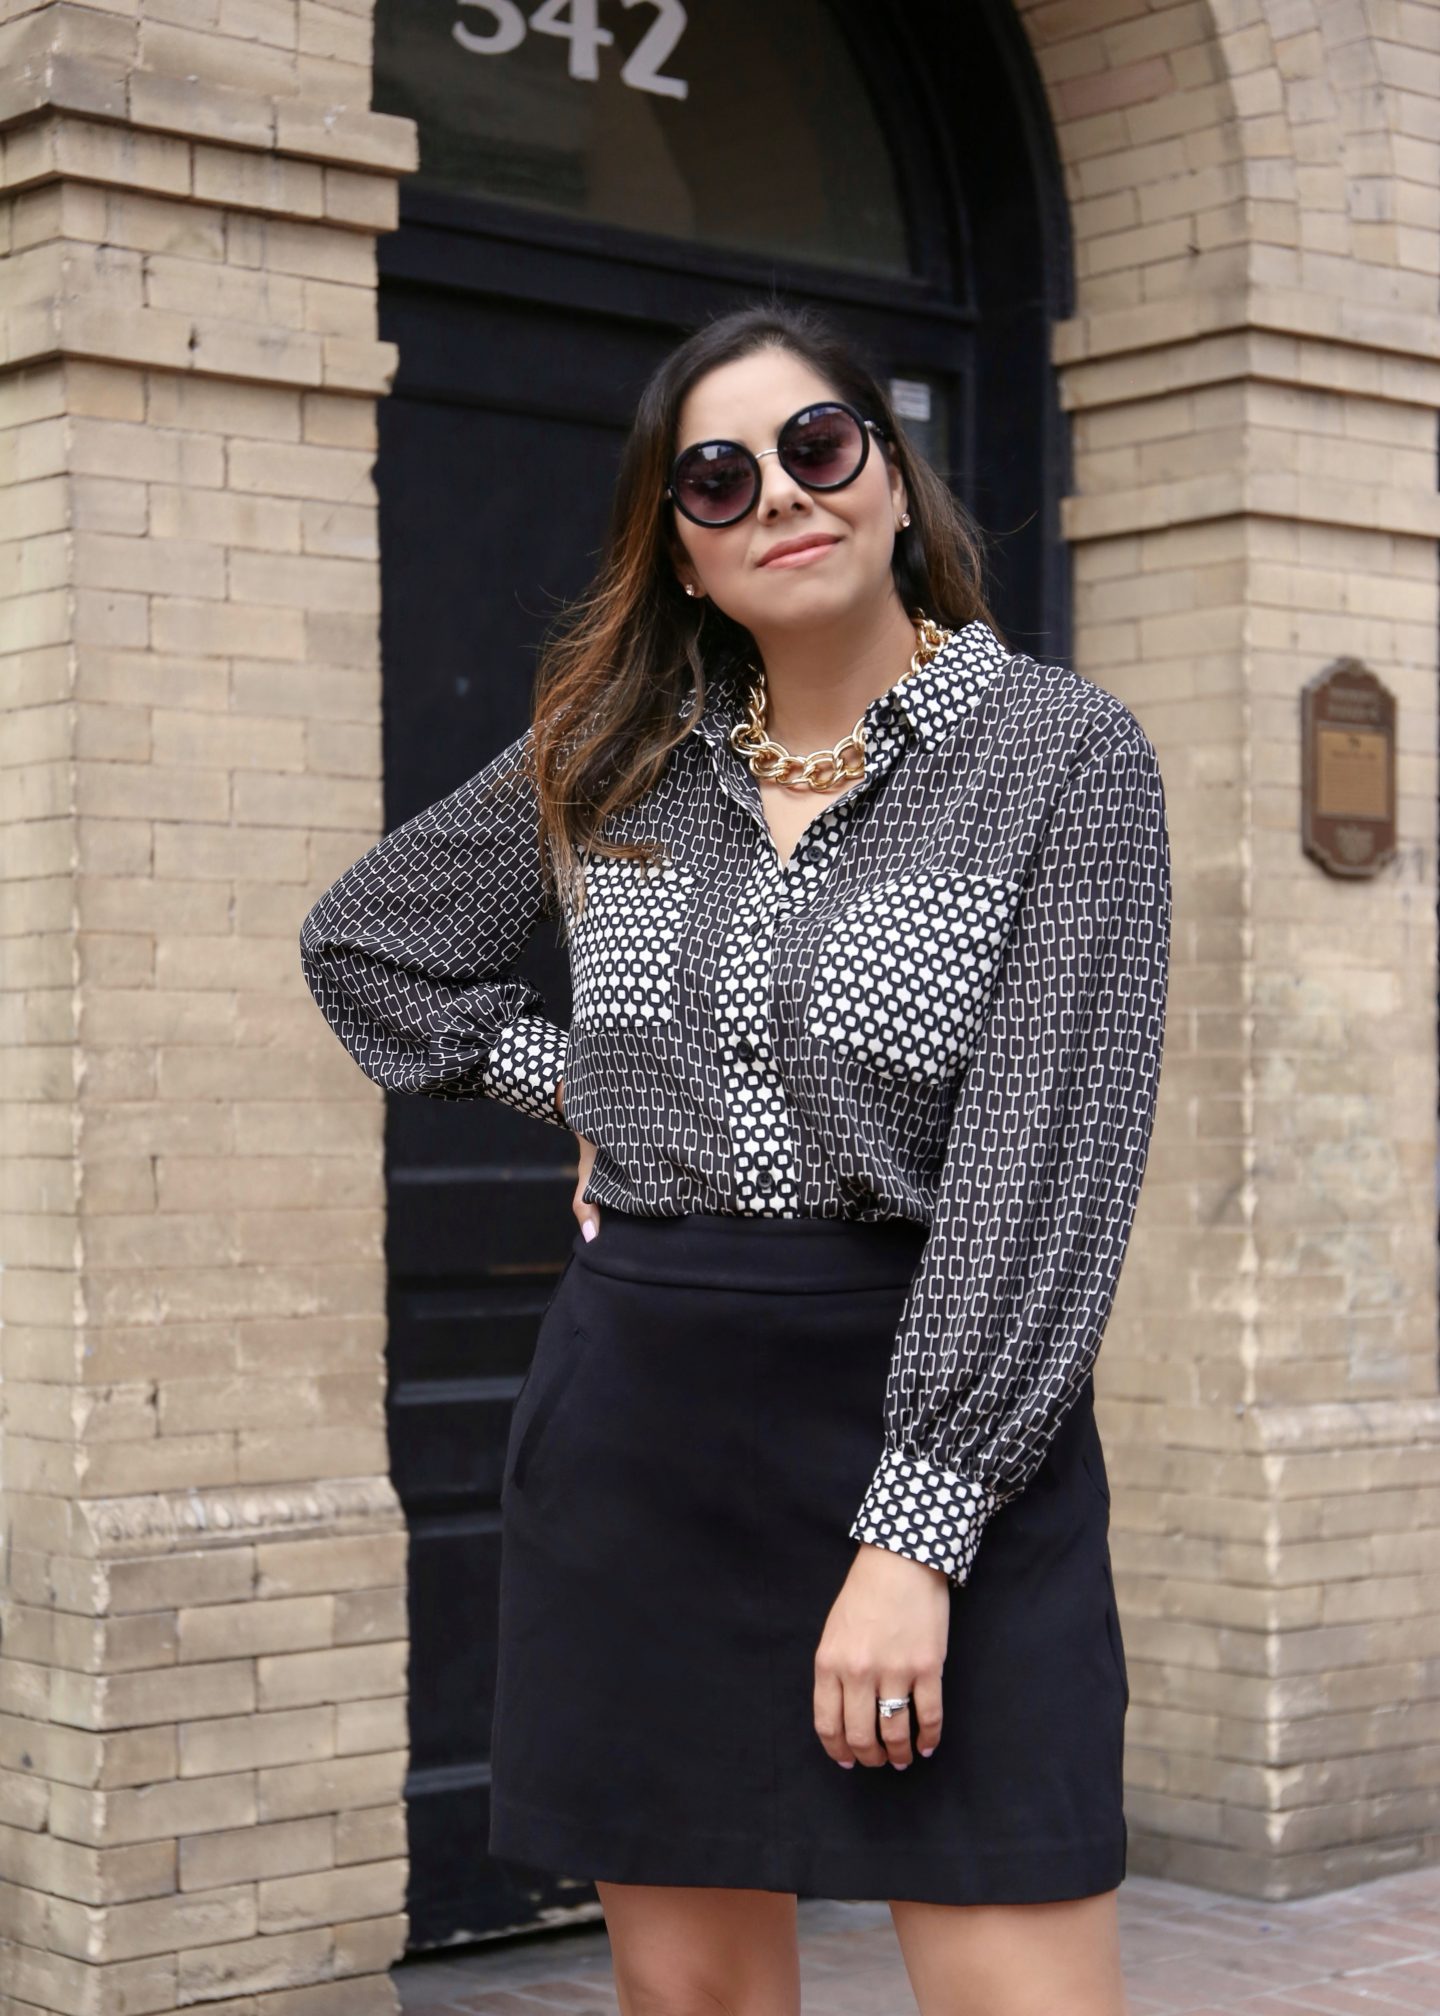 affordable chic black and white outfit, how to wear a chunky gold necklace, san diego style instagrammer